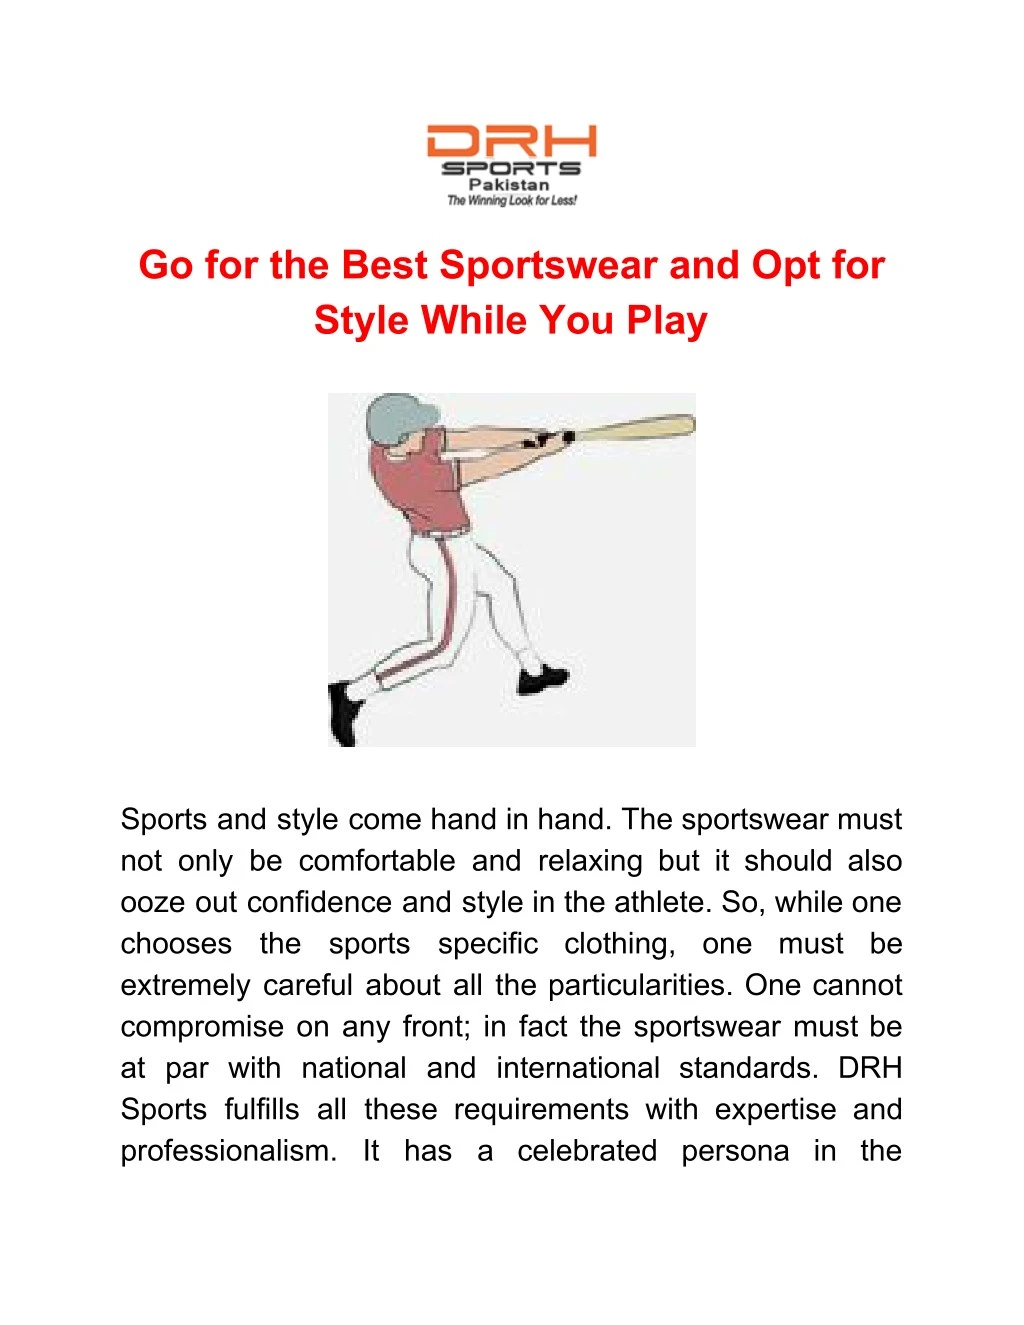 go for the best sportswear and opt for style